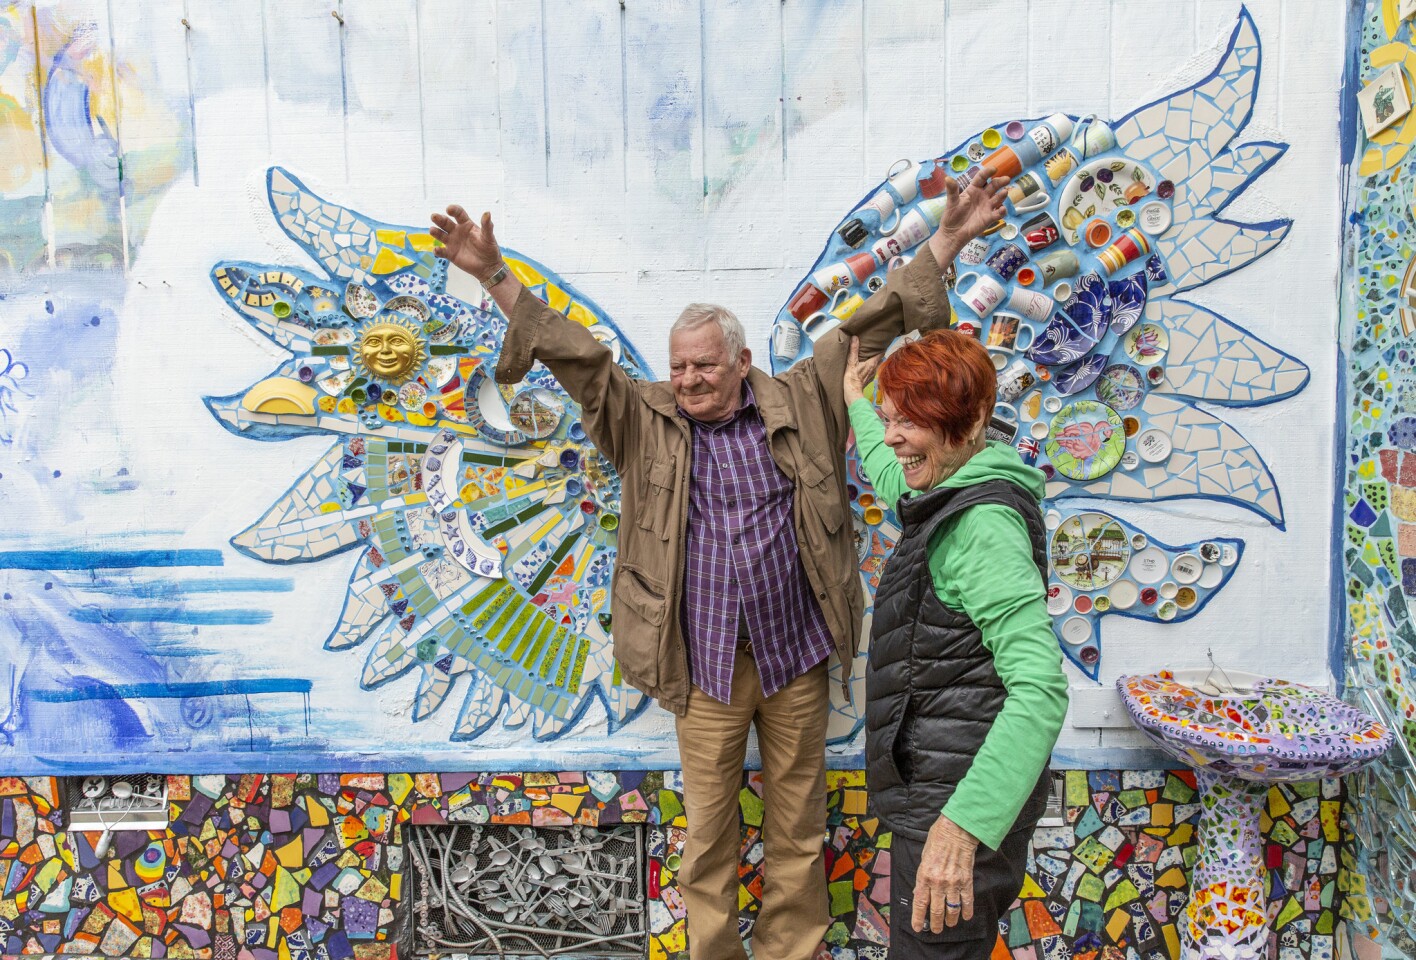 Artist Cheri Pann helps guest Bernard Giraux pose with mosaic tile wings at the Mosaic Tile House, which she and her husband own.